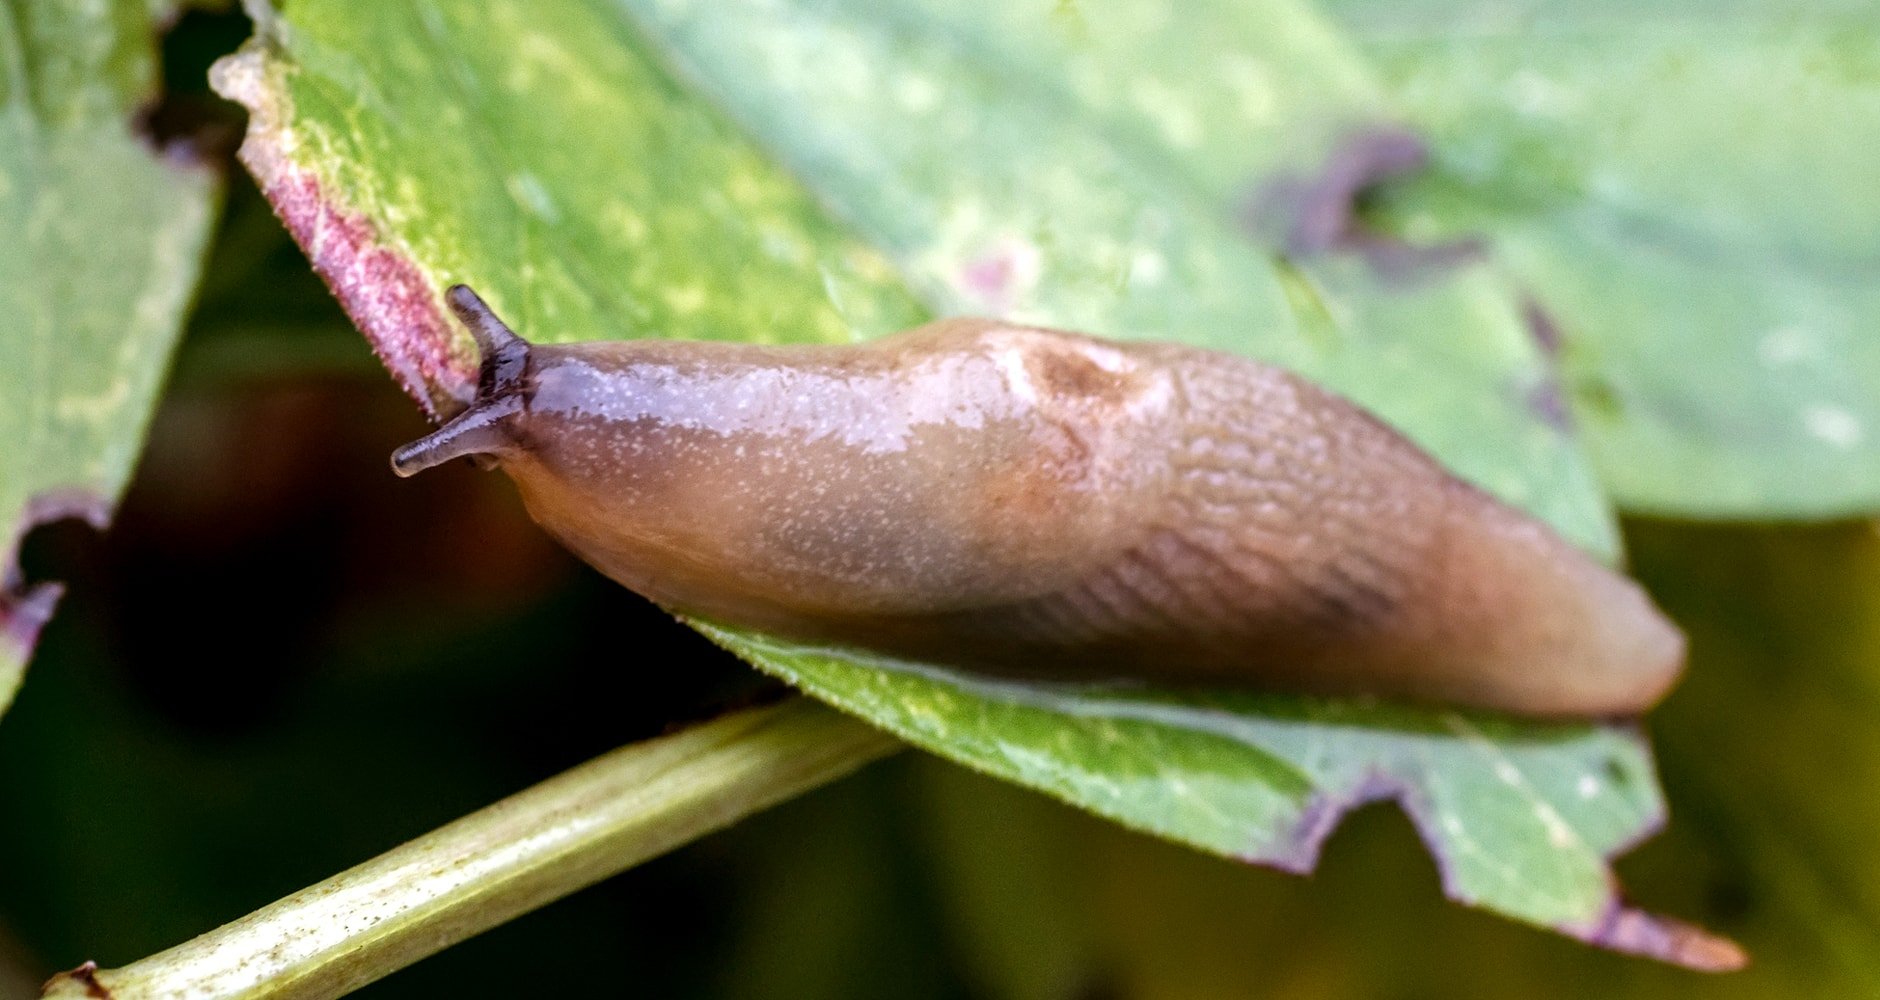 What are some common misconceptions about slugs?